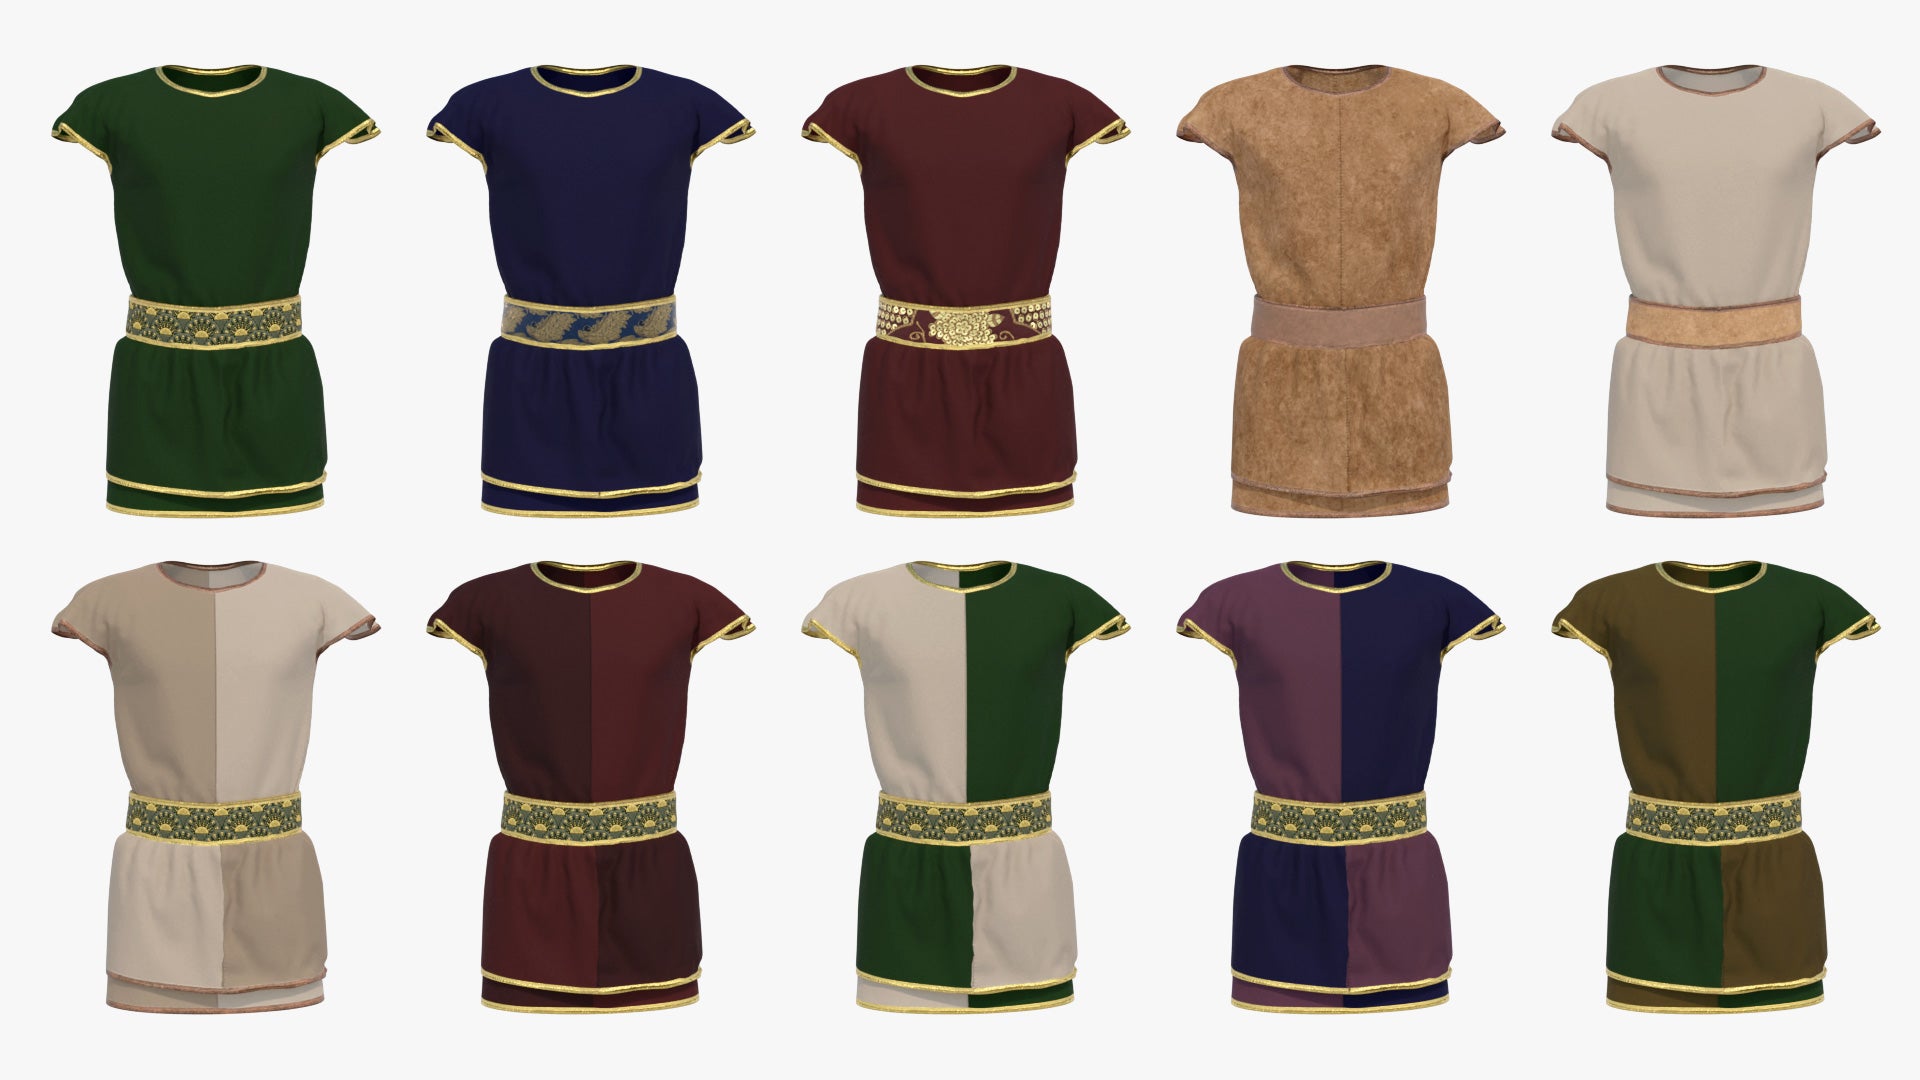 Medieval tunic and belt, ancient rome style 3d model with low polycount and PBR textures